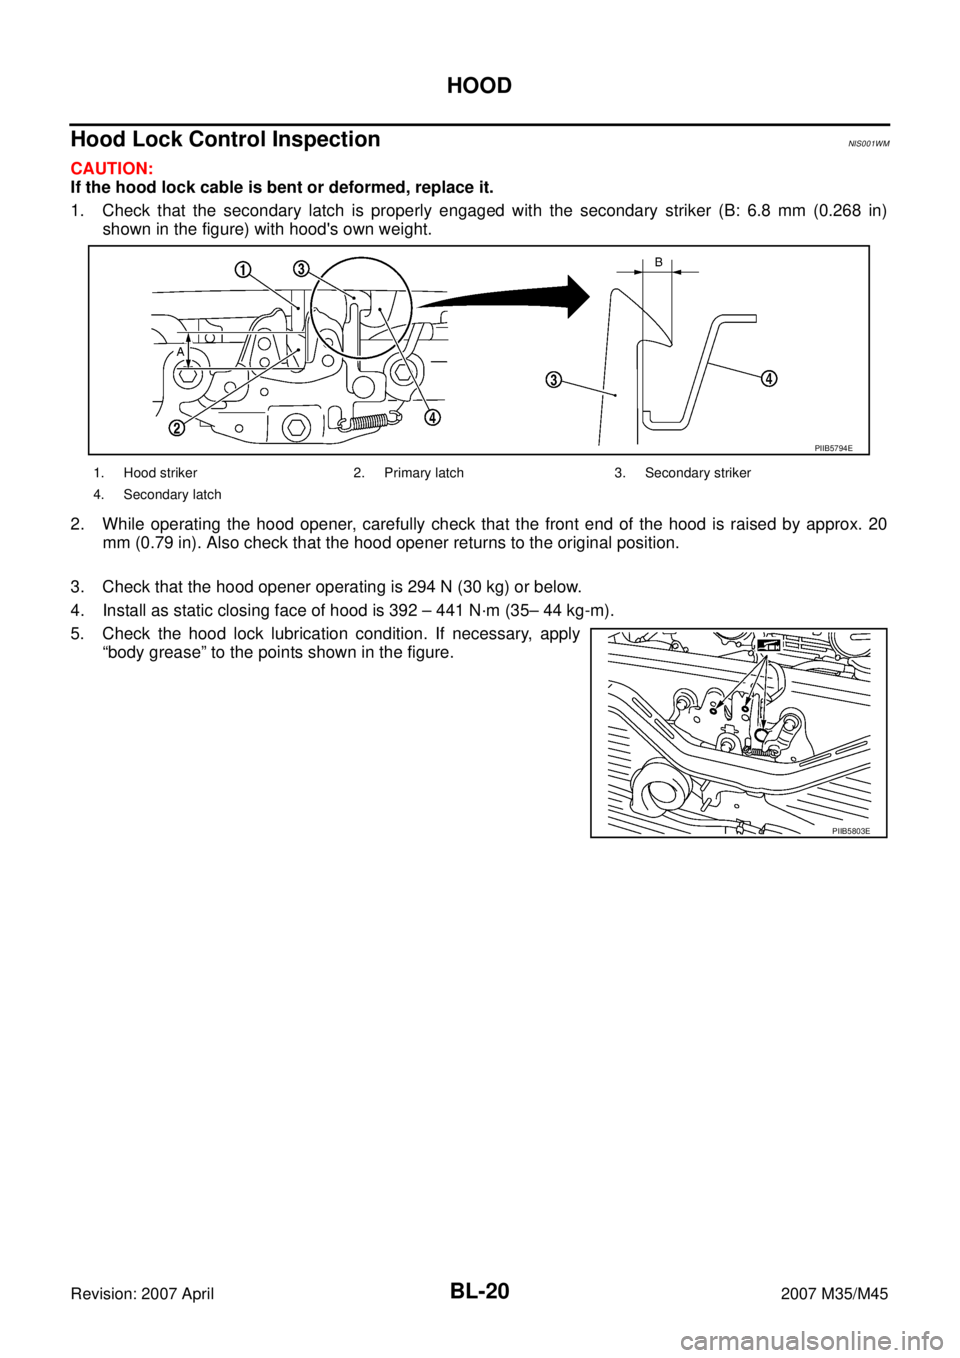 INFINITI M35 2007  Factory Service Manual BL-20
HOOD
Revision: 2007 April2007 M35/M45
Hood Lock Control InspectionNIS001WM
CAUTION:
If the hood lock cable is bent or deformed, replace it.
1. Check that the secondary latch is properly engaged 